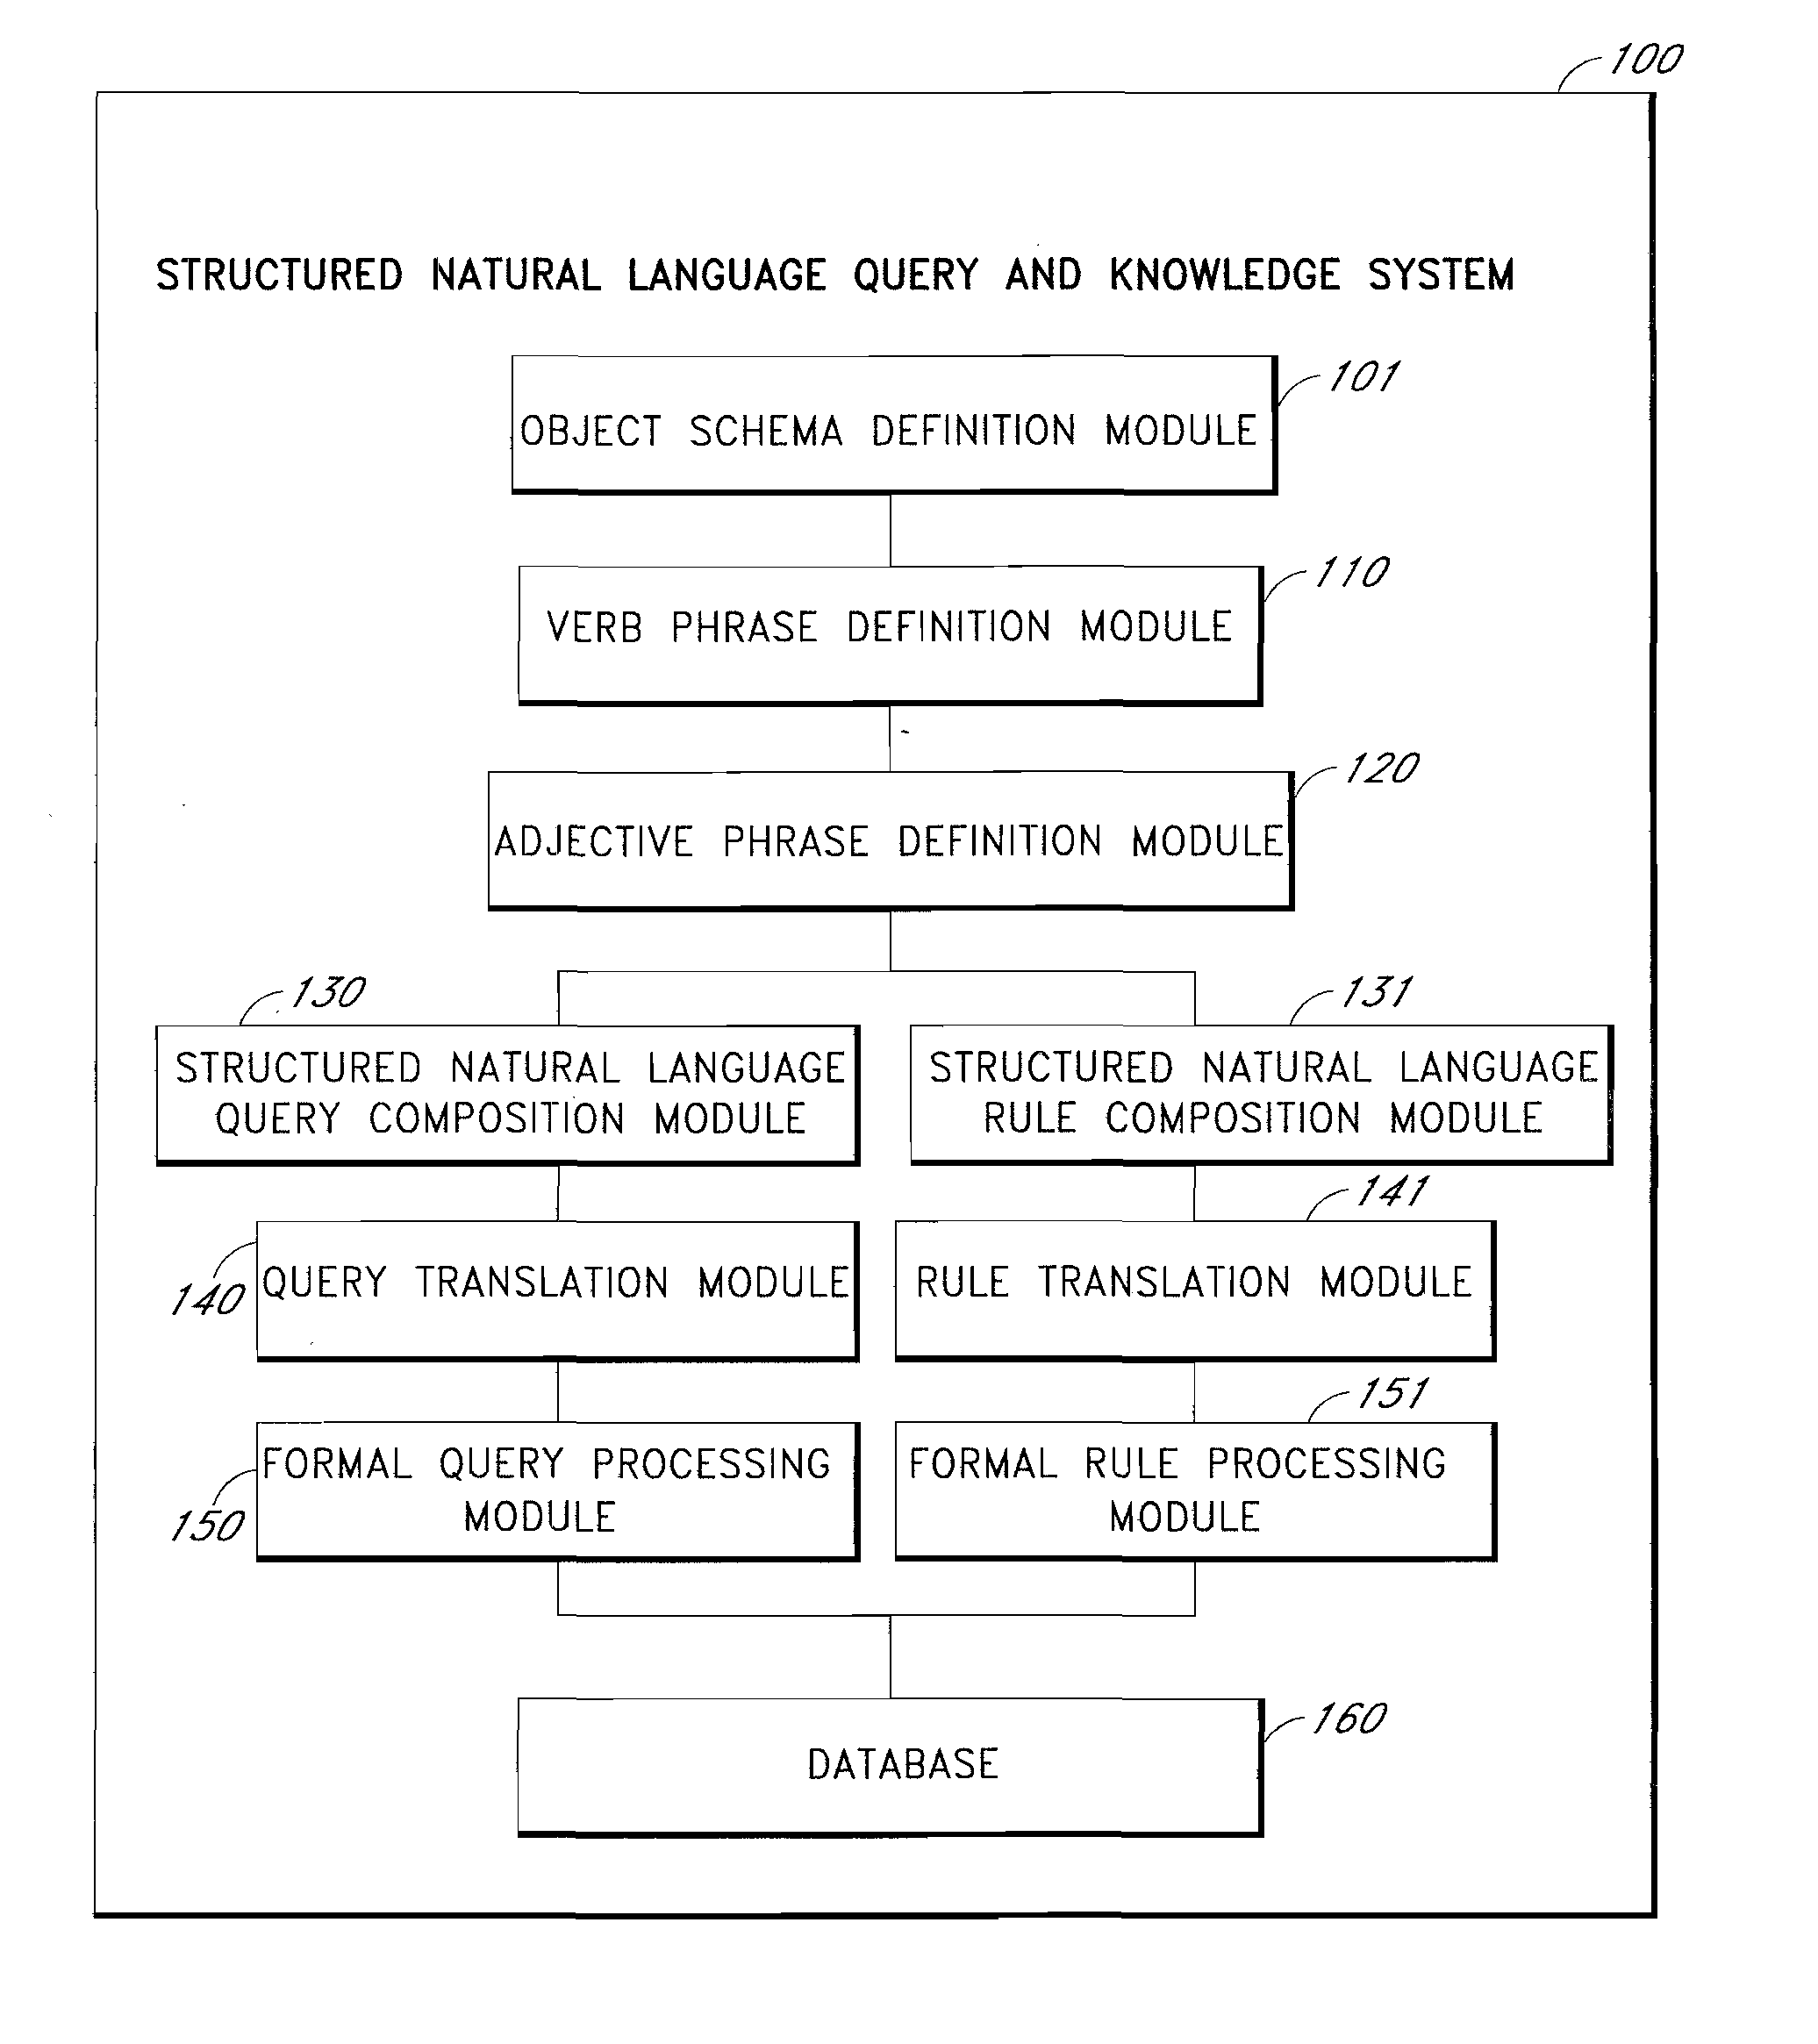 Structured natural language query and knowledge system